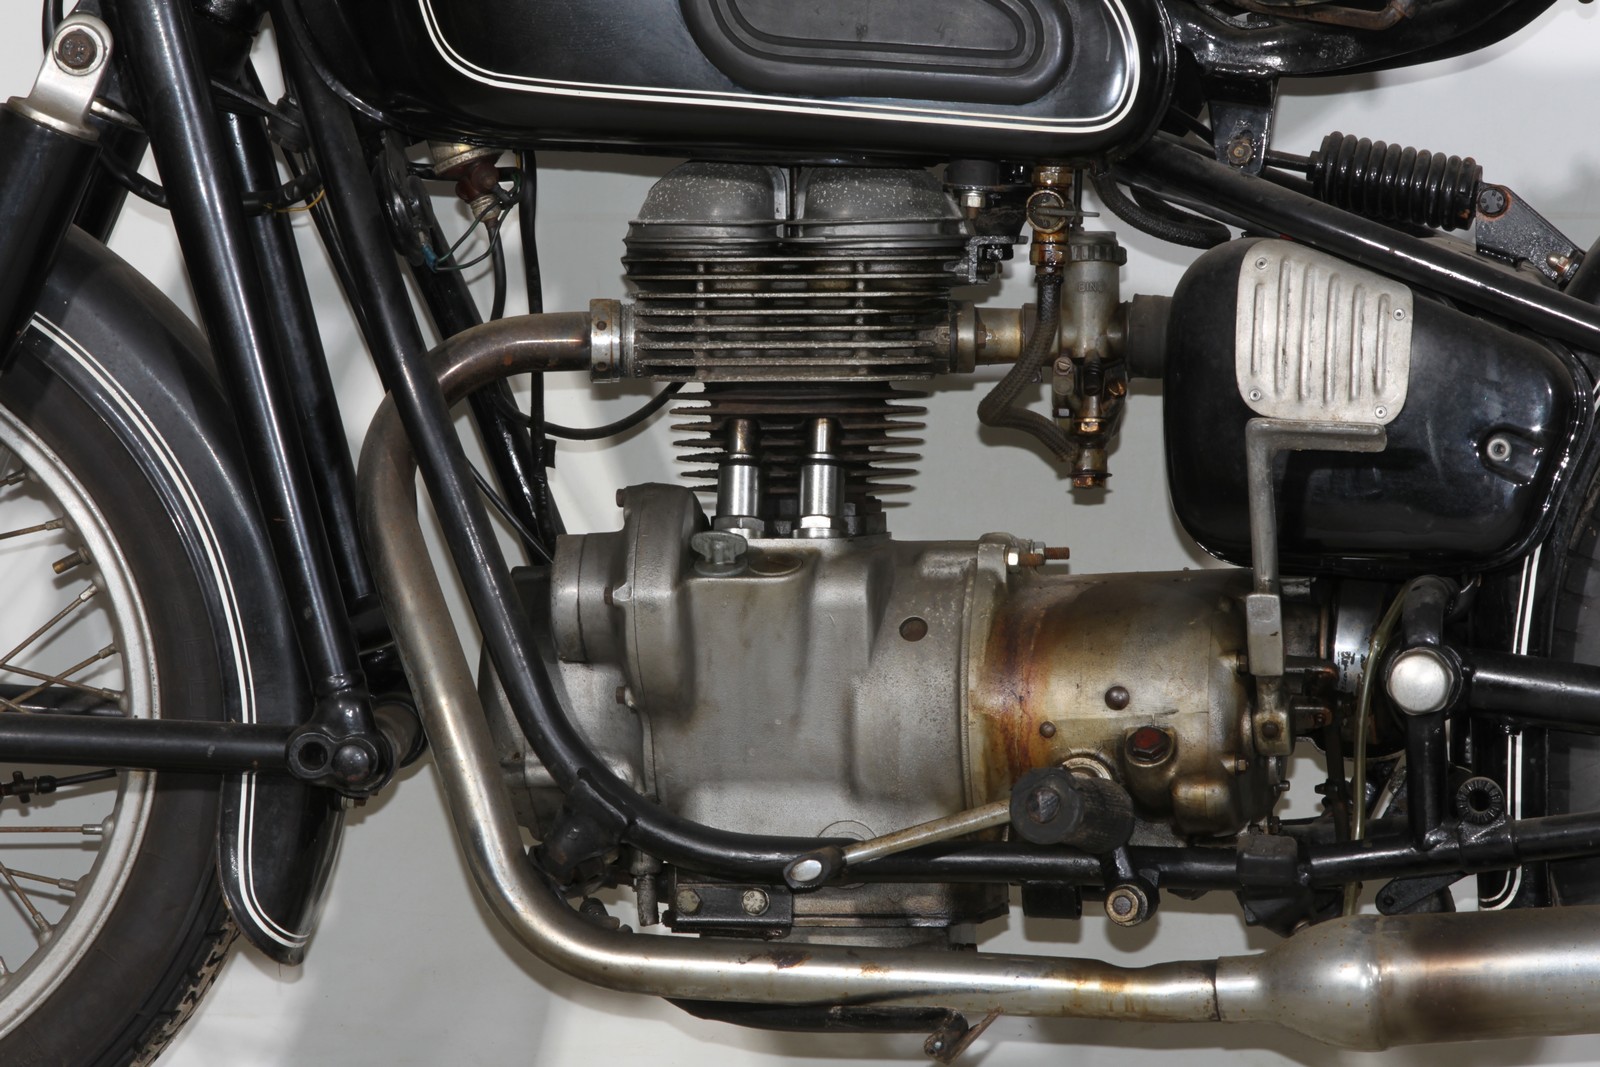 1960s BMW R27 247cc OHV Shaft Drive - Image 2 of 8